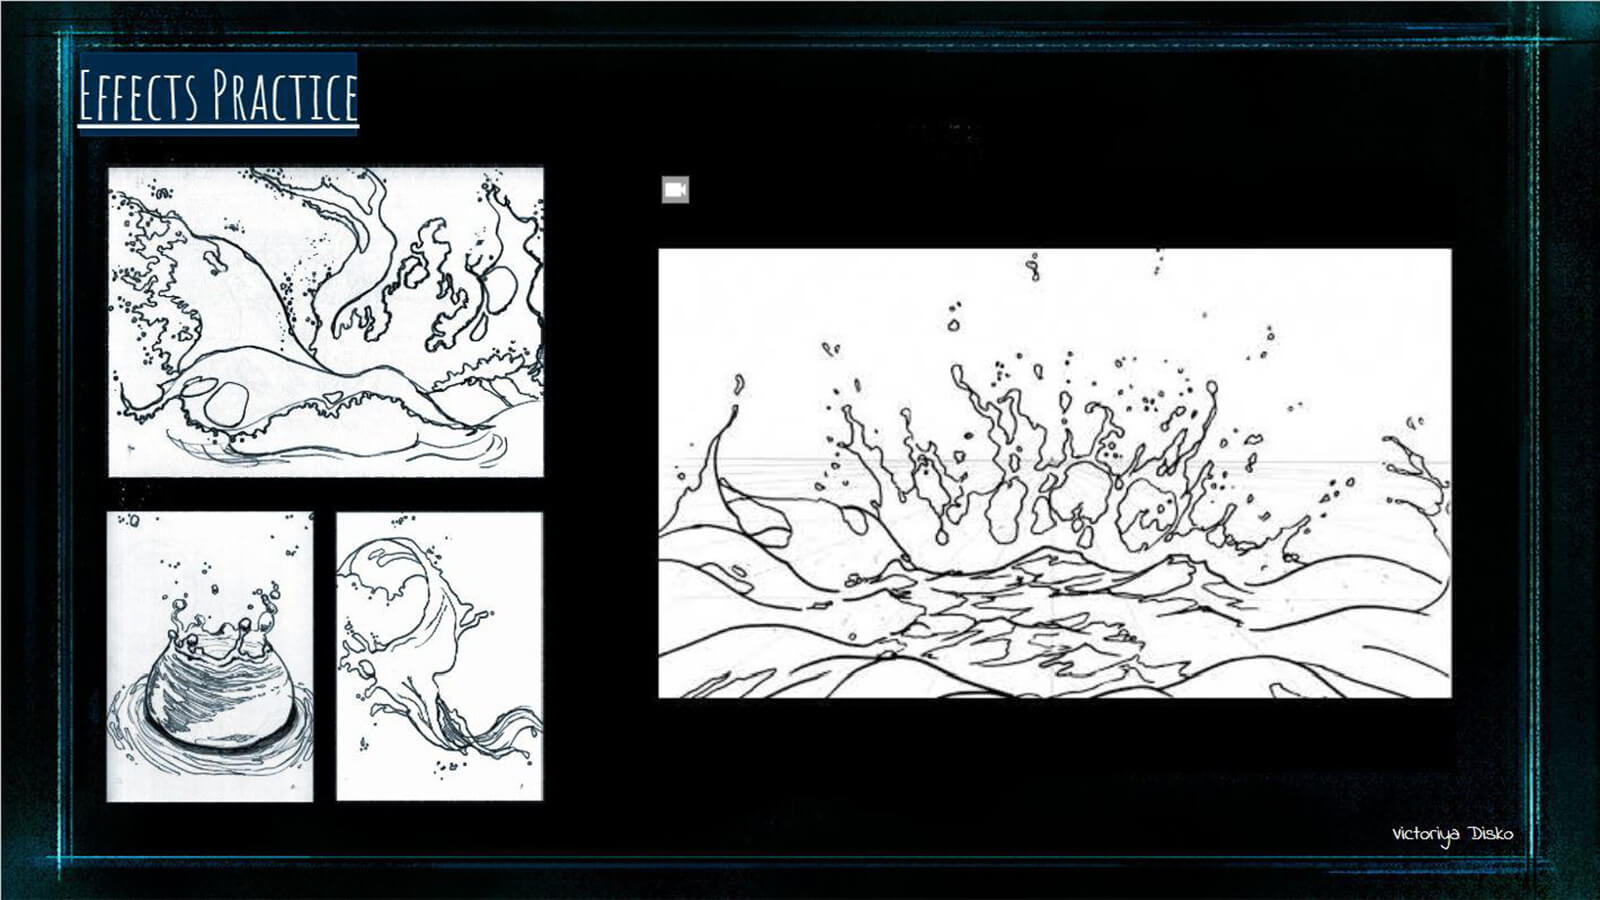 A slide showing the drawing practice the team did on the film's water effects.